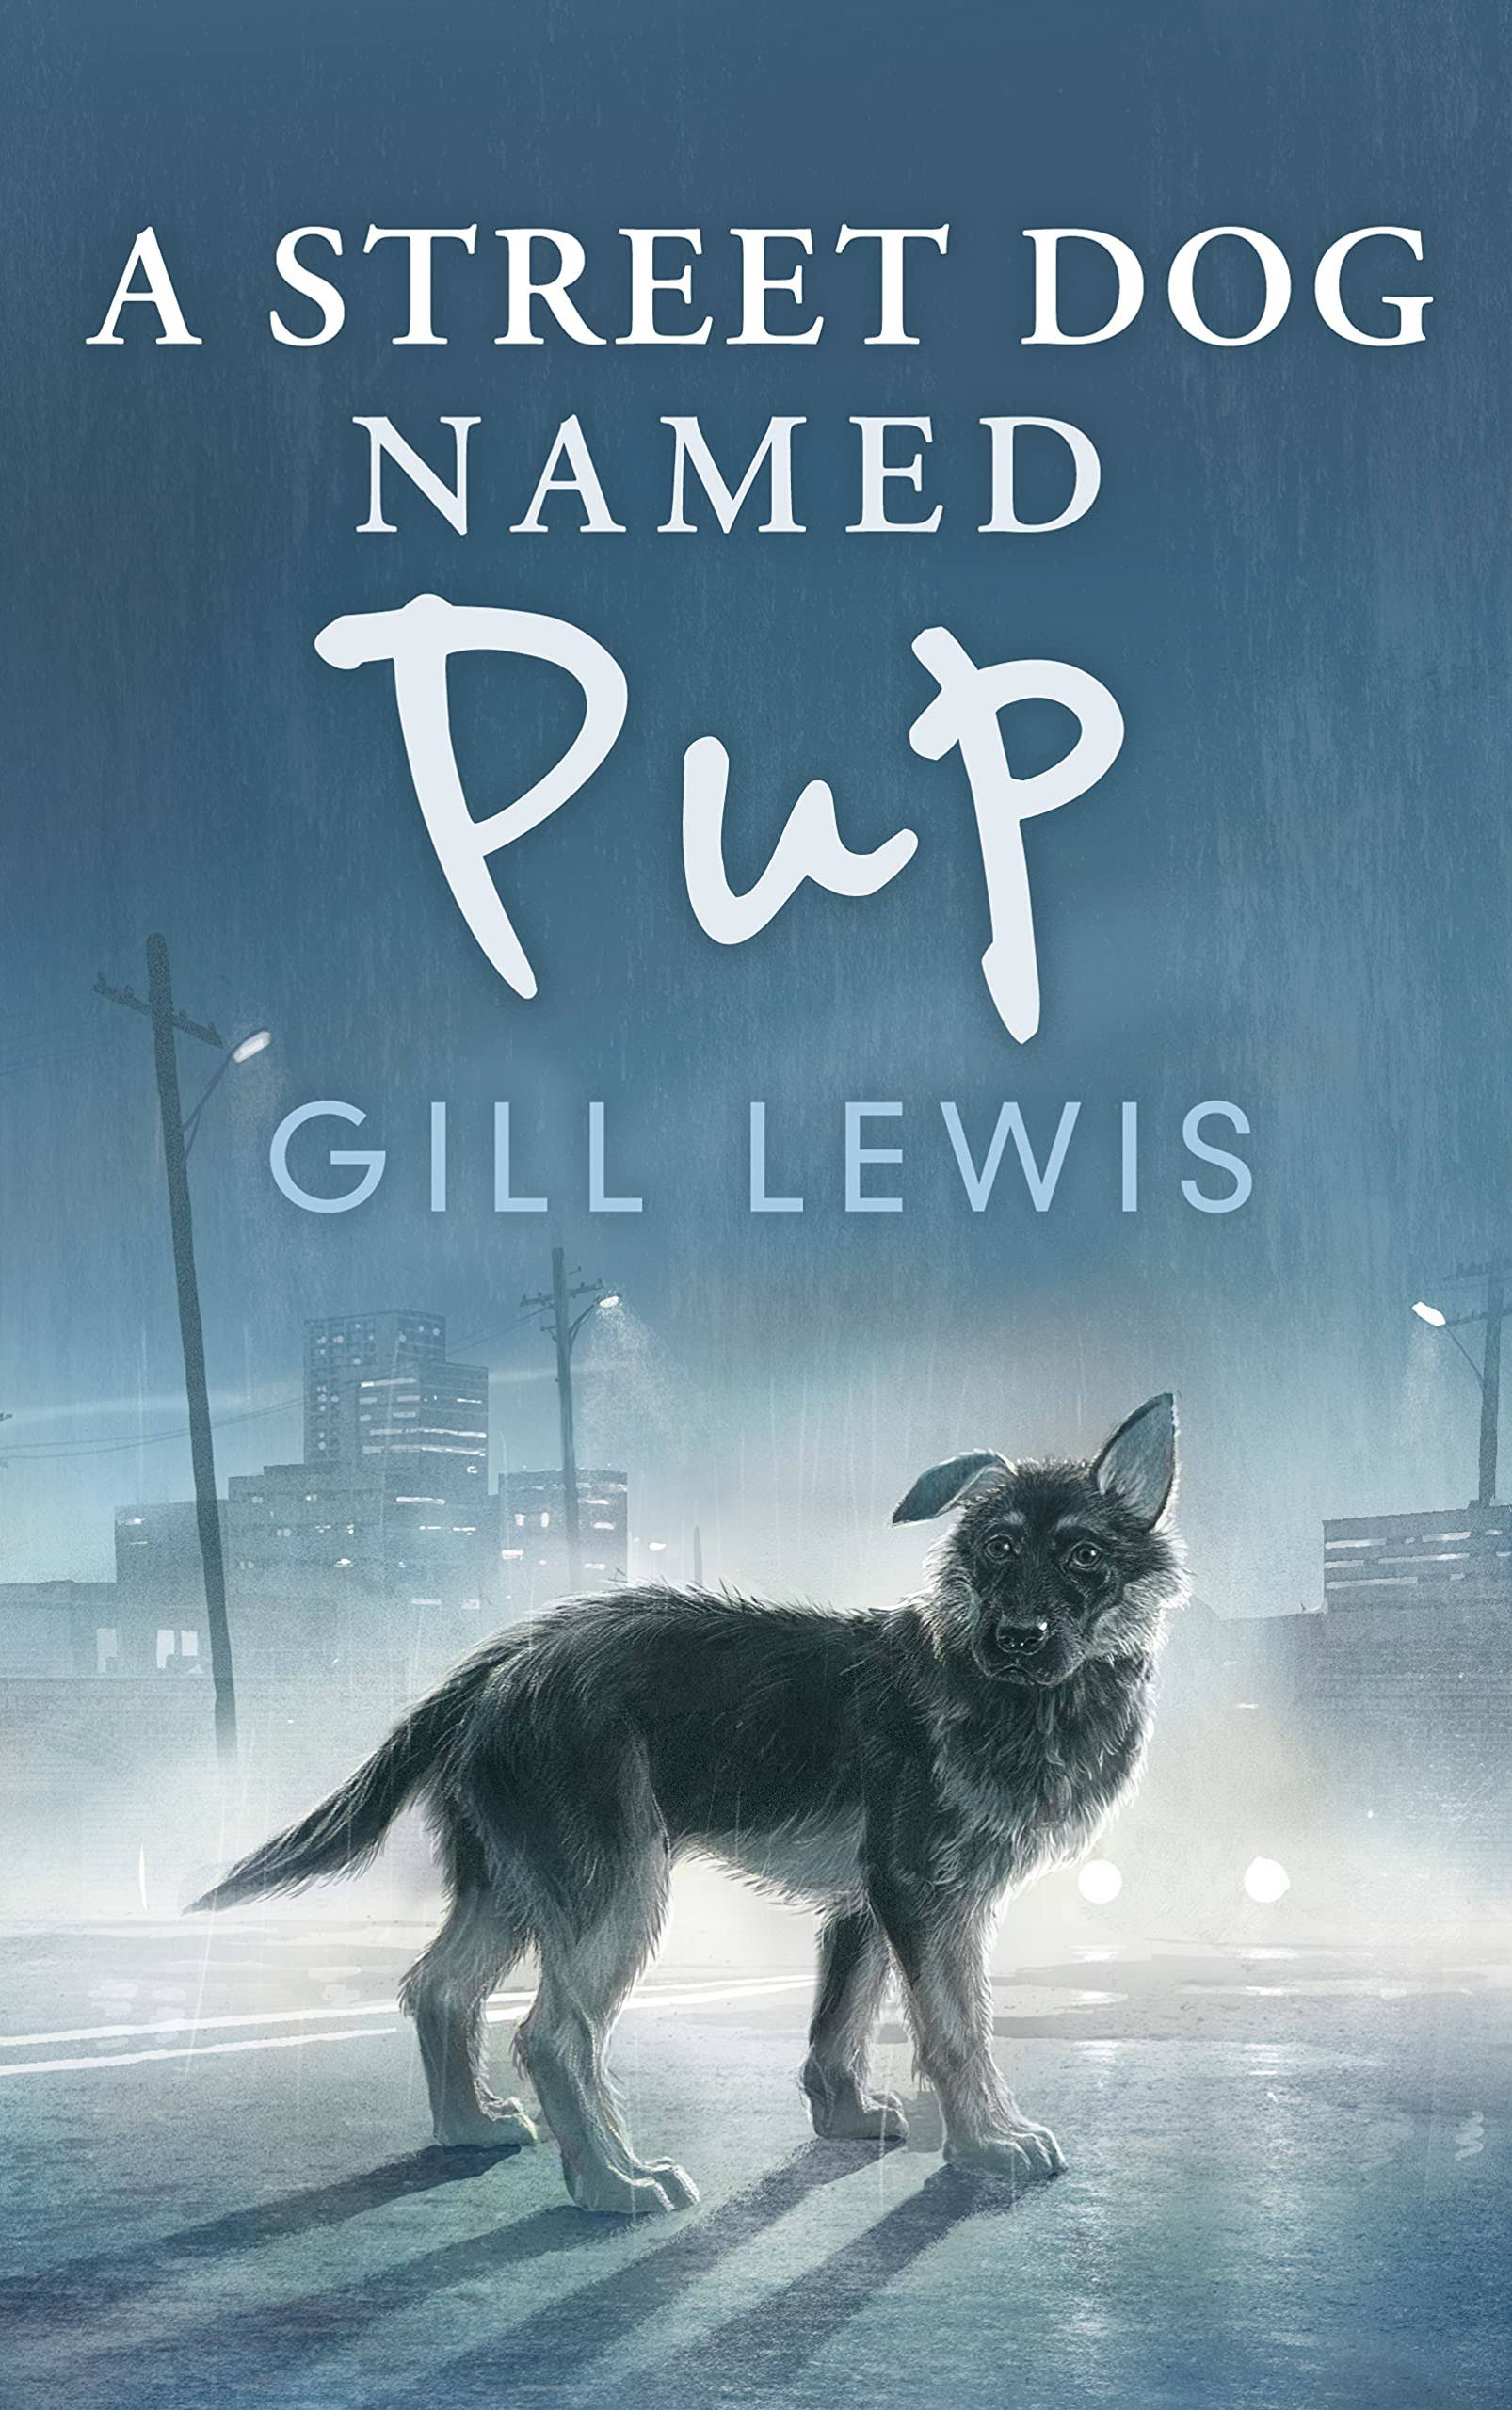 A Street Dog Named Pup [Book]